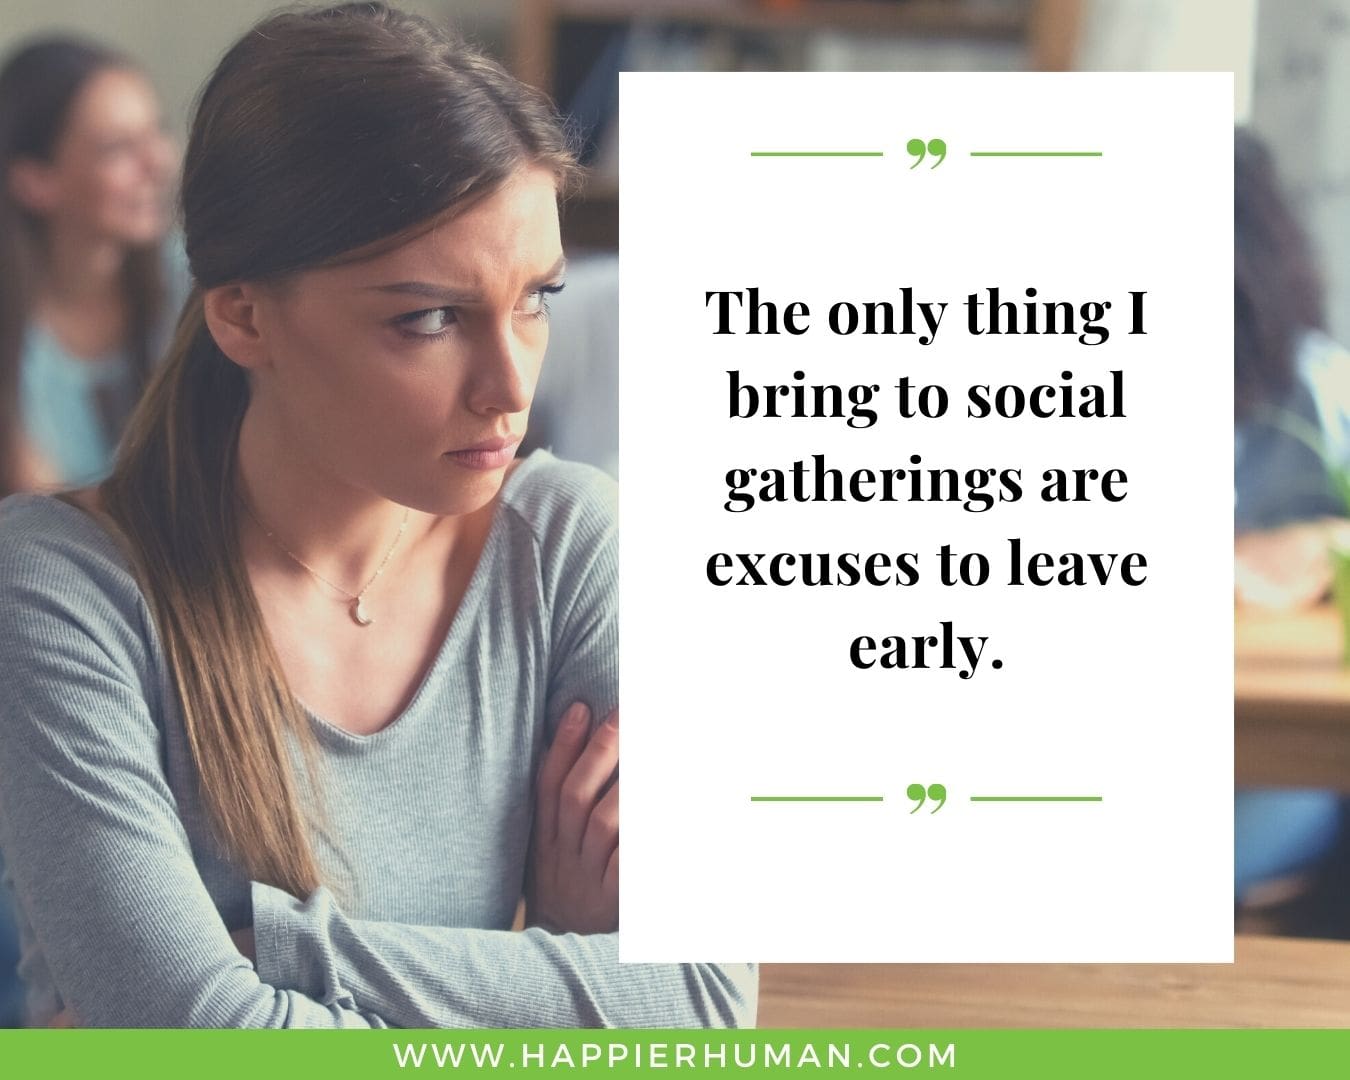 Introvert Quotes - “The only thing I bring to social gatherings are excuses to leave early.”